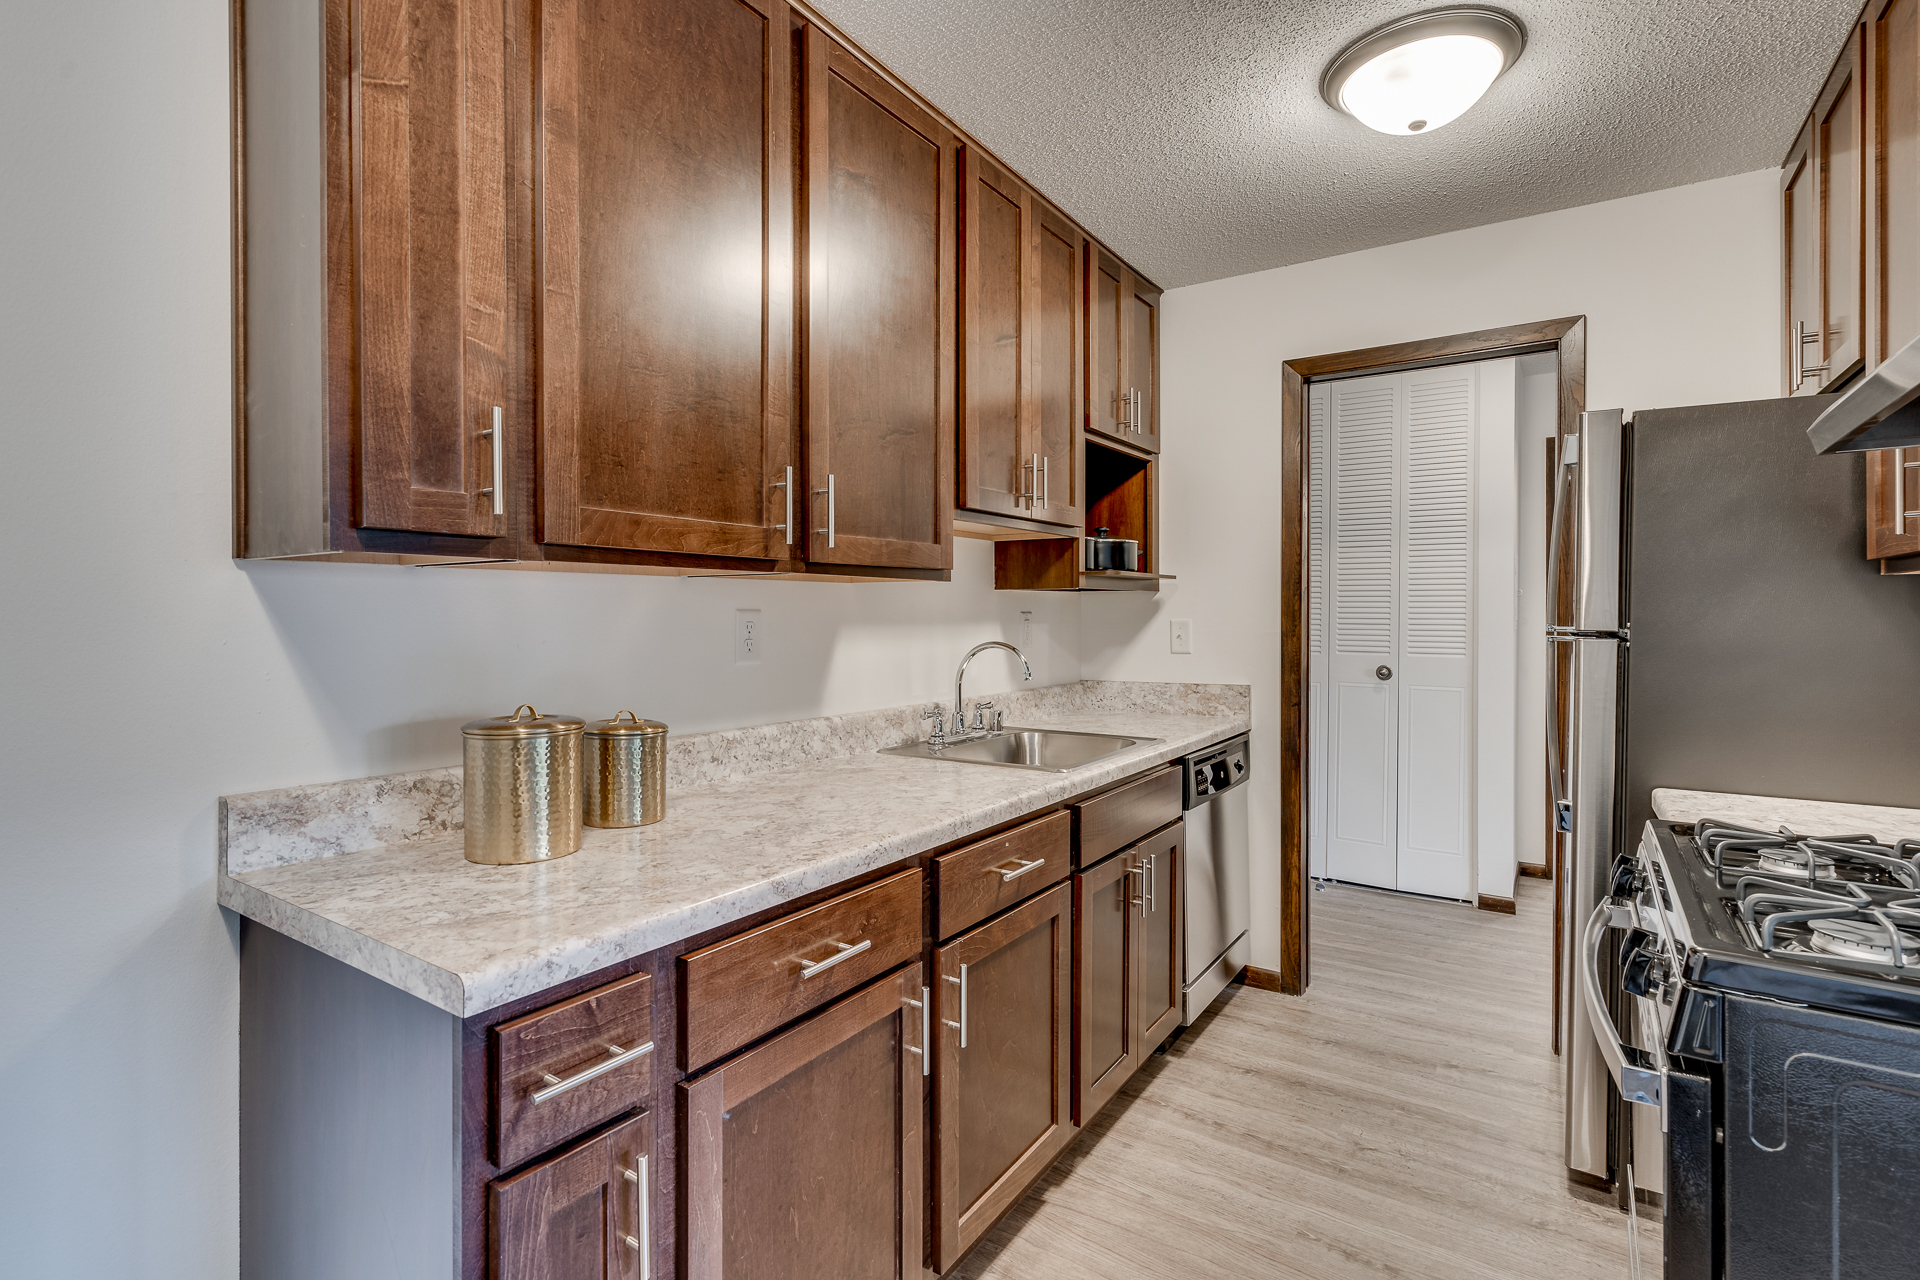 Model Unit Kitchen At Sumter Green Apartments In Crystal, MN